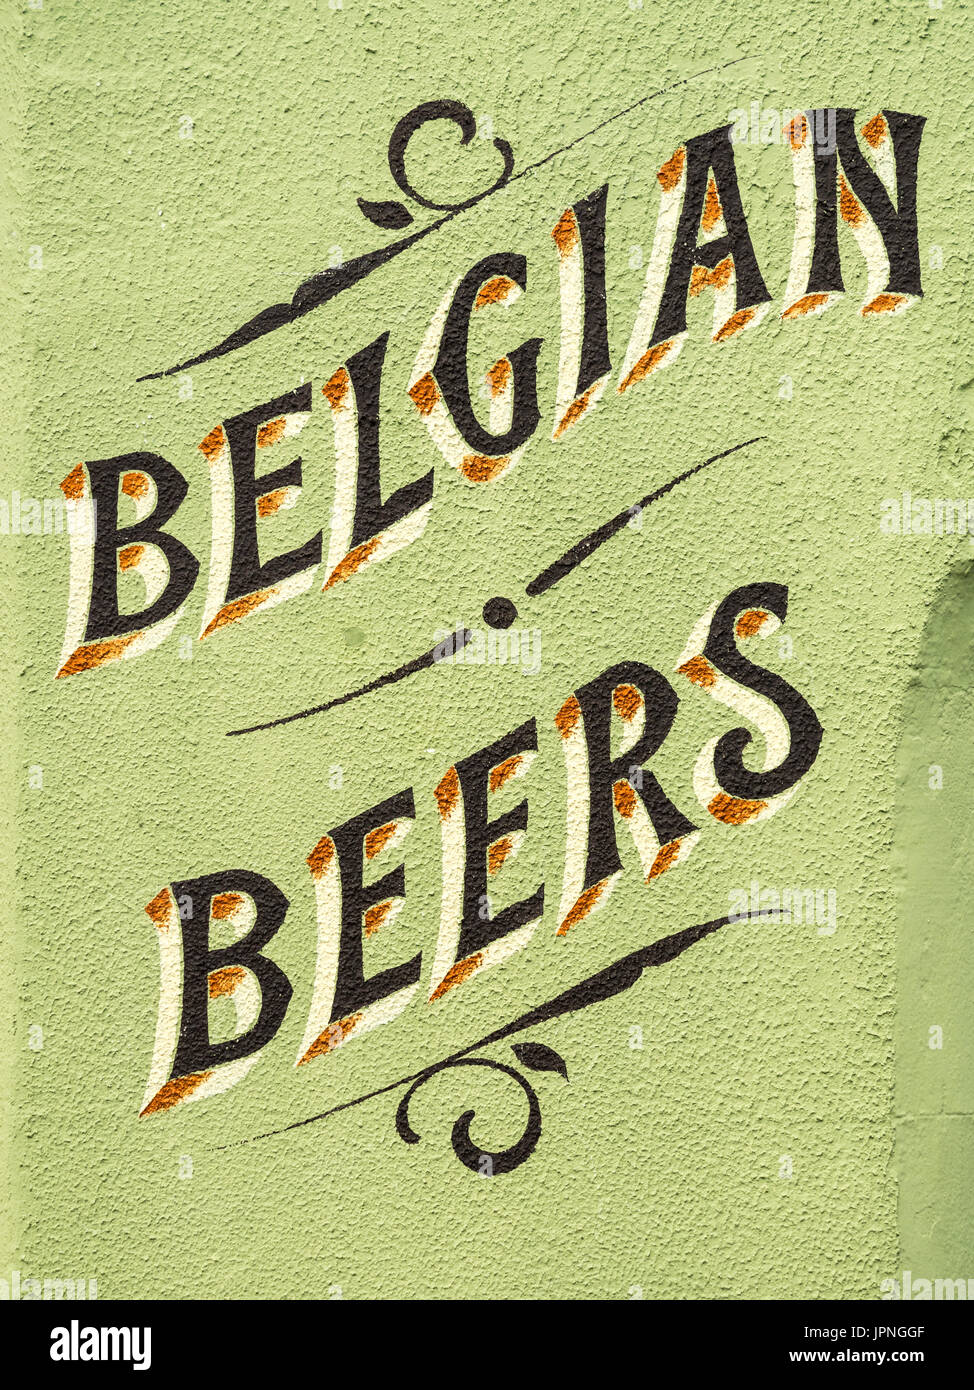 Belgian Beers - Painted Sign advertising Belgian beers on the wall of a pub in Cambridge UK Stock Photo